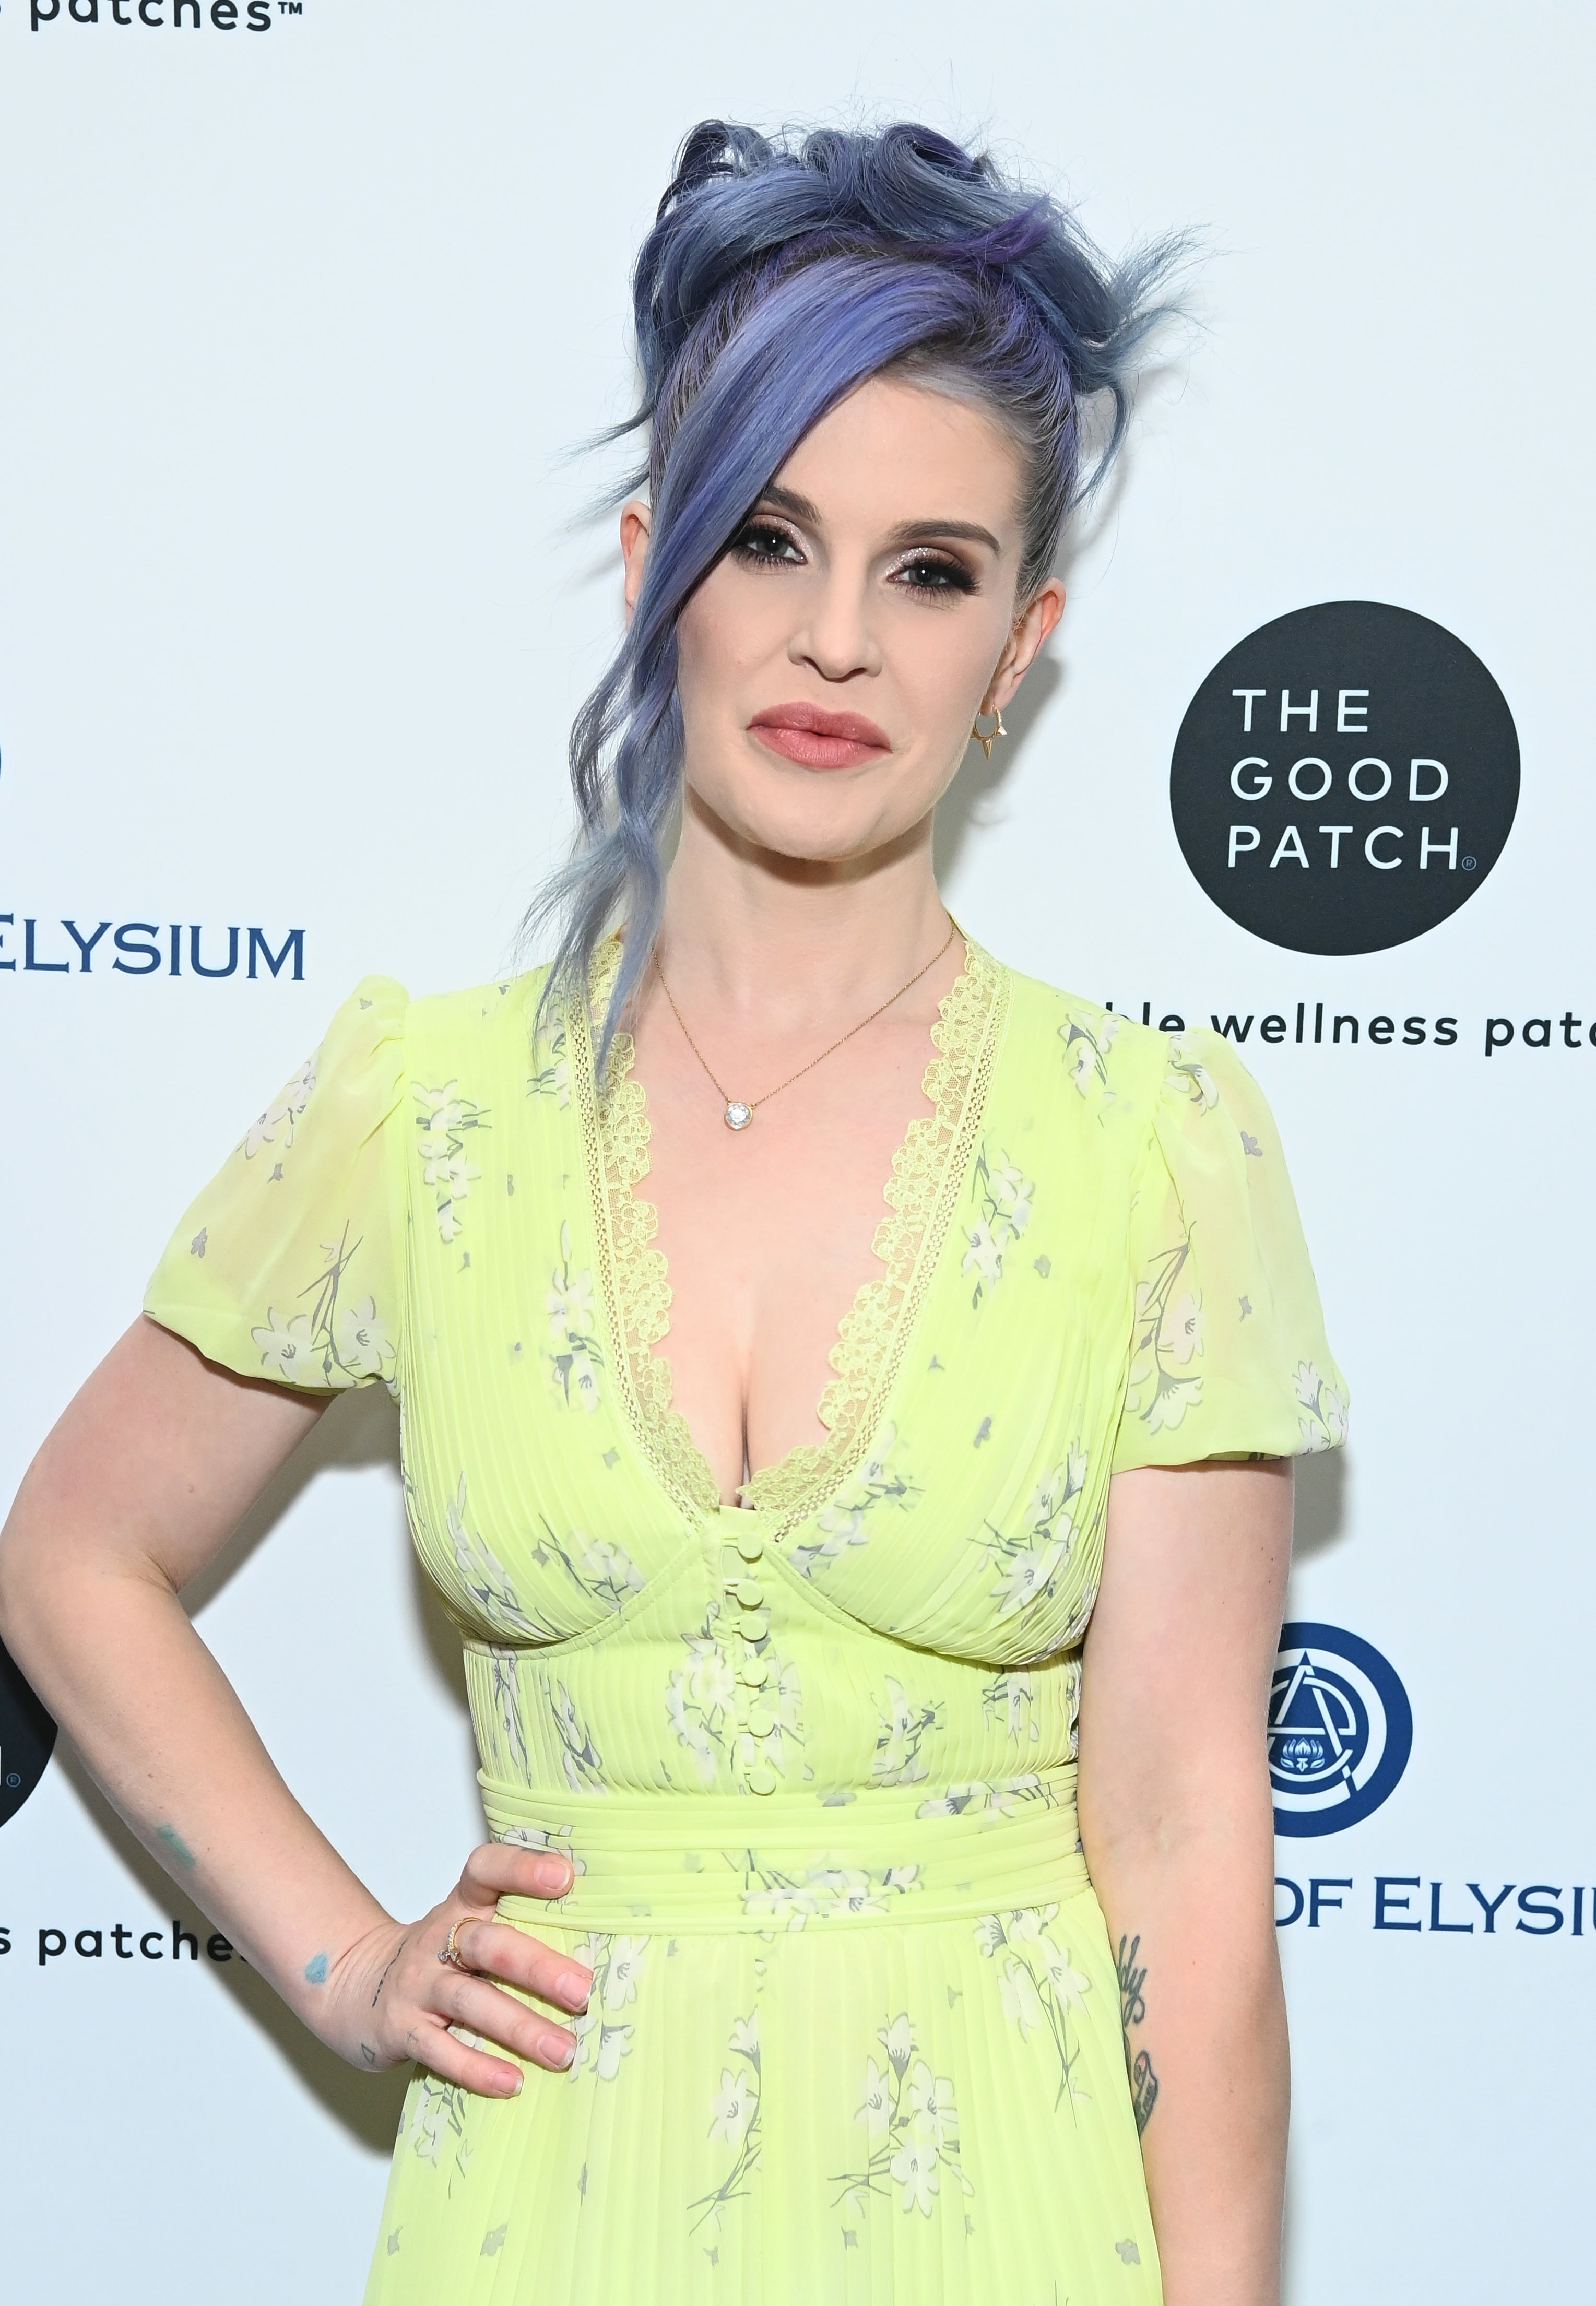 Woman with blue hair styled up, wearing a light yellow, floral dress, at The Art of Elysium event